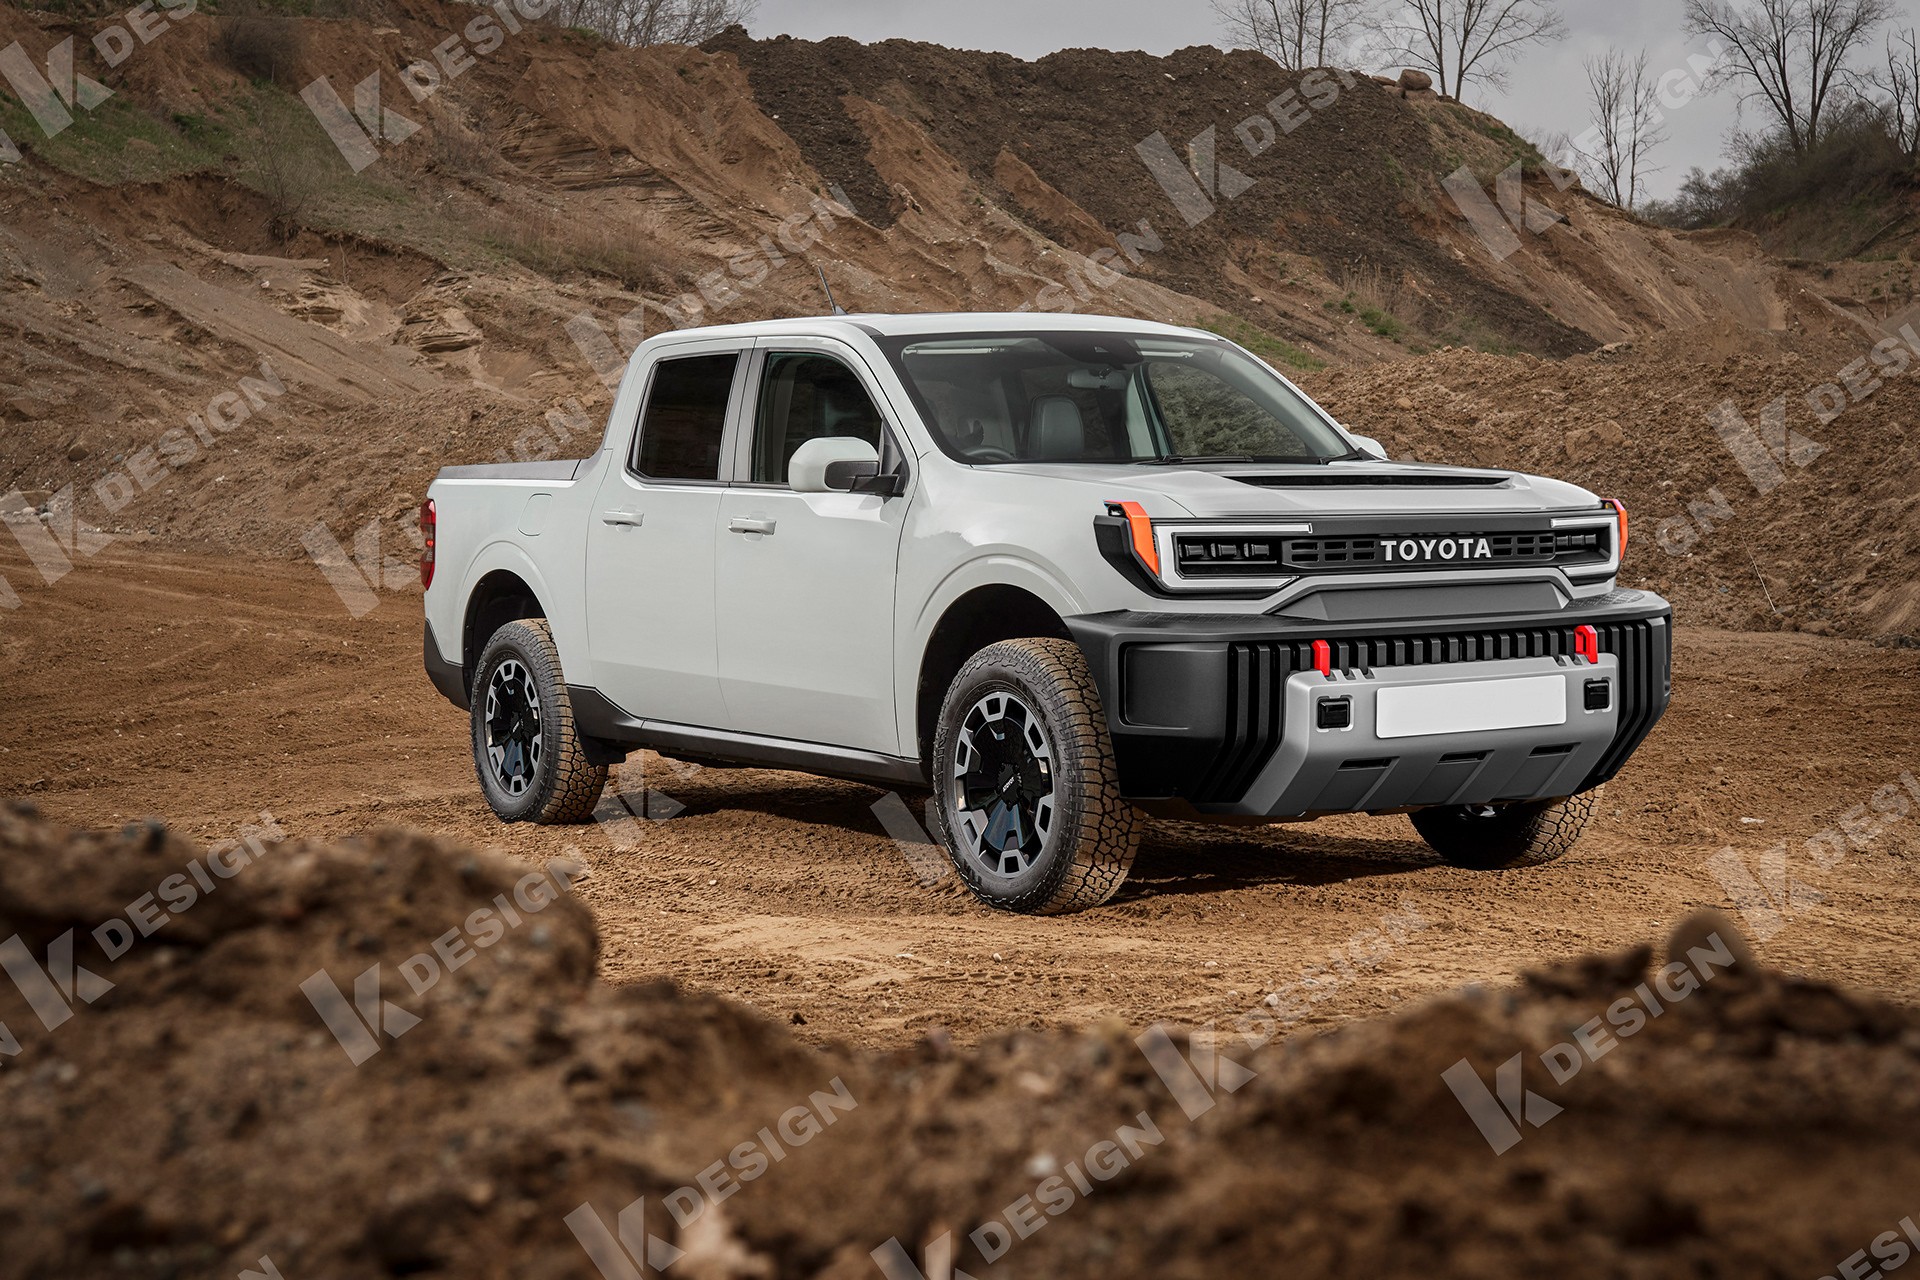 10 Expected Features Of The 2024 Toyota Stout Compact Pickup Truck